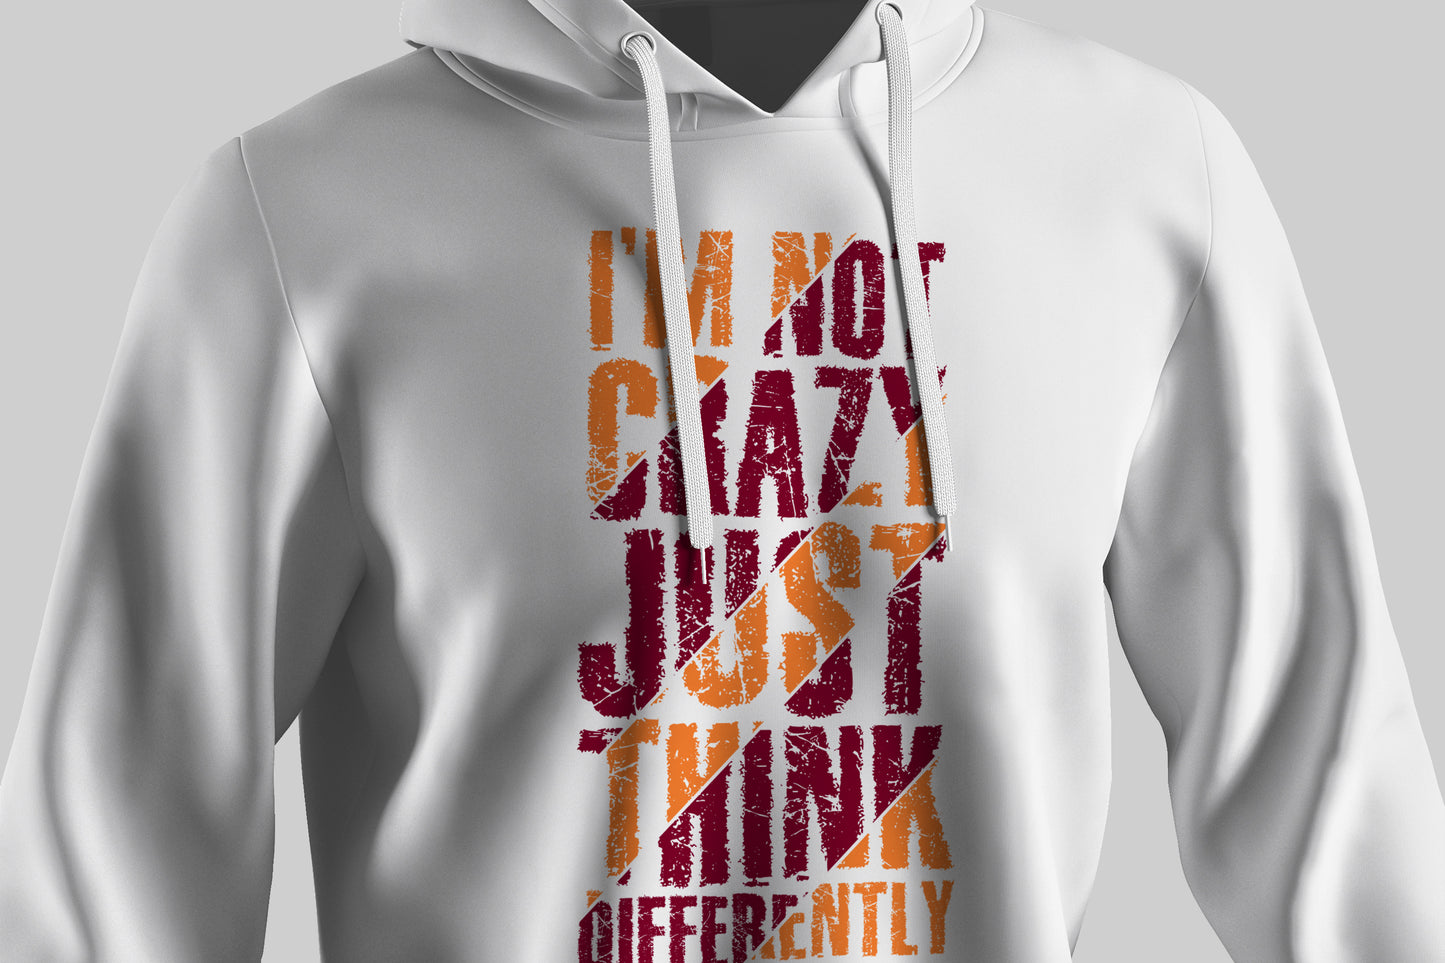 "THINK DIFFERENTLY" Hooded Sweatshirt